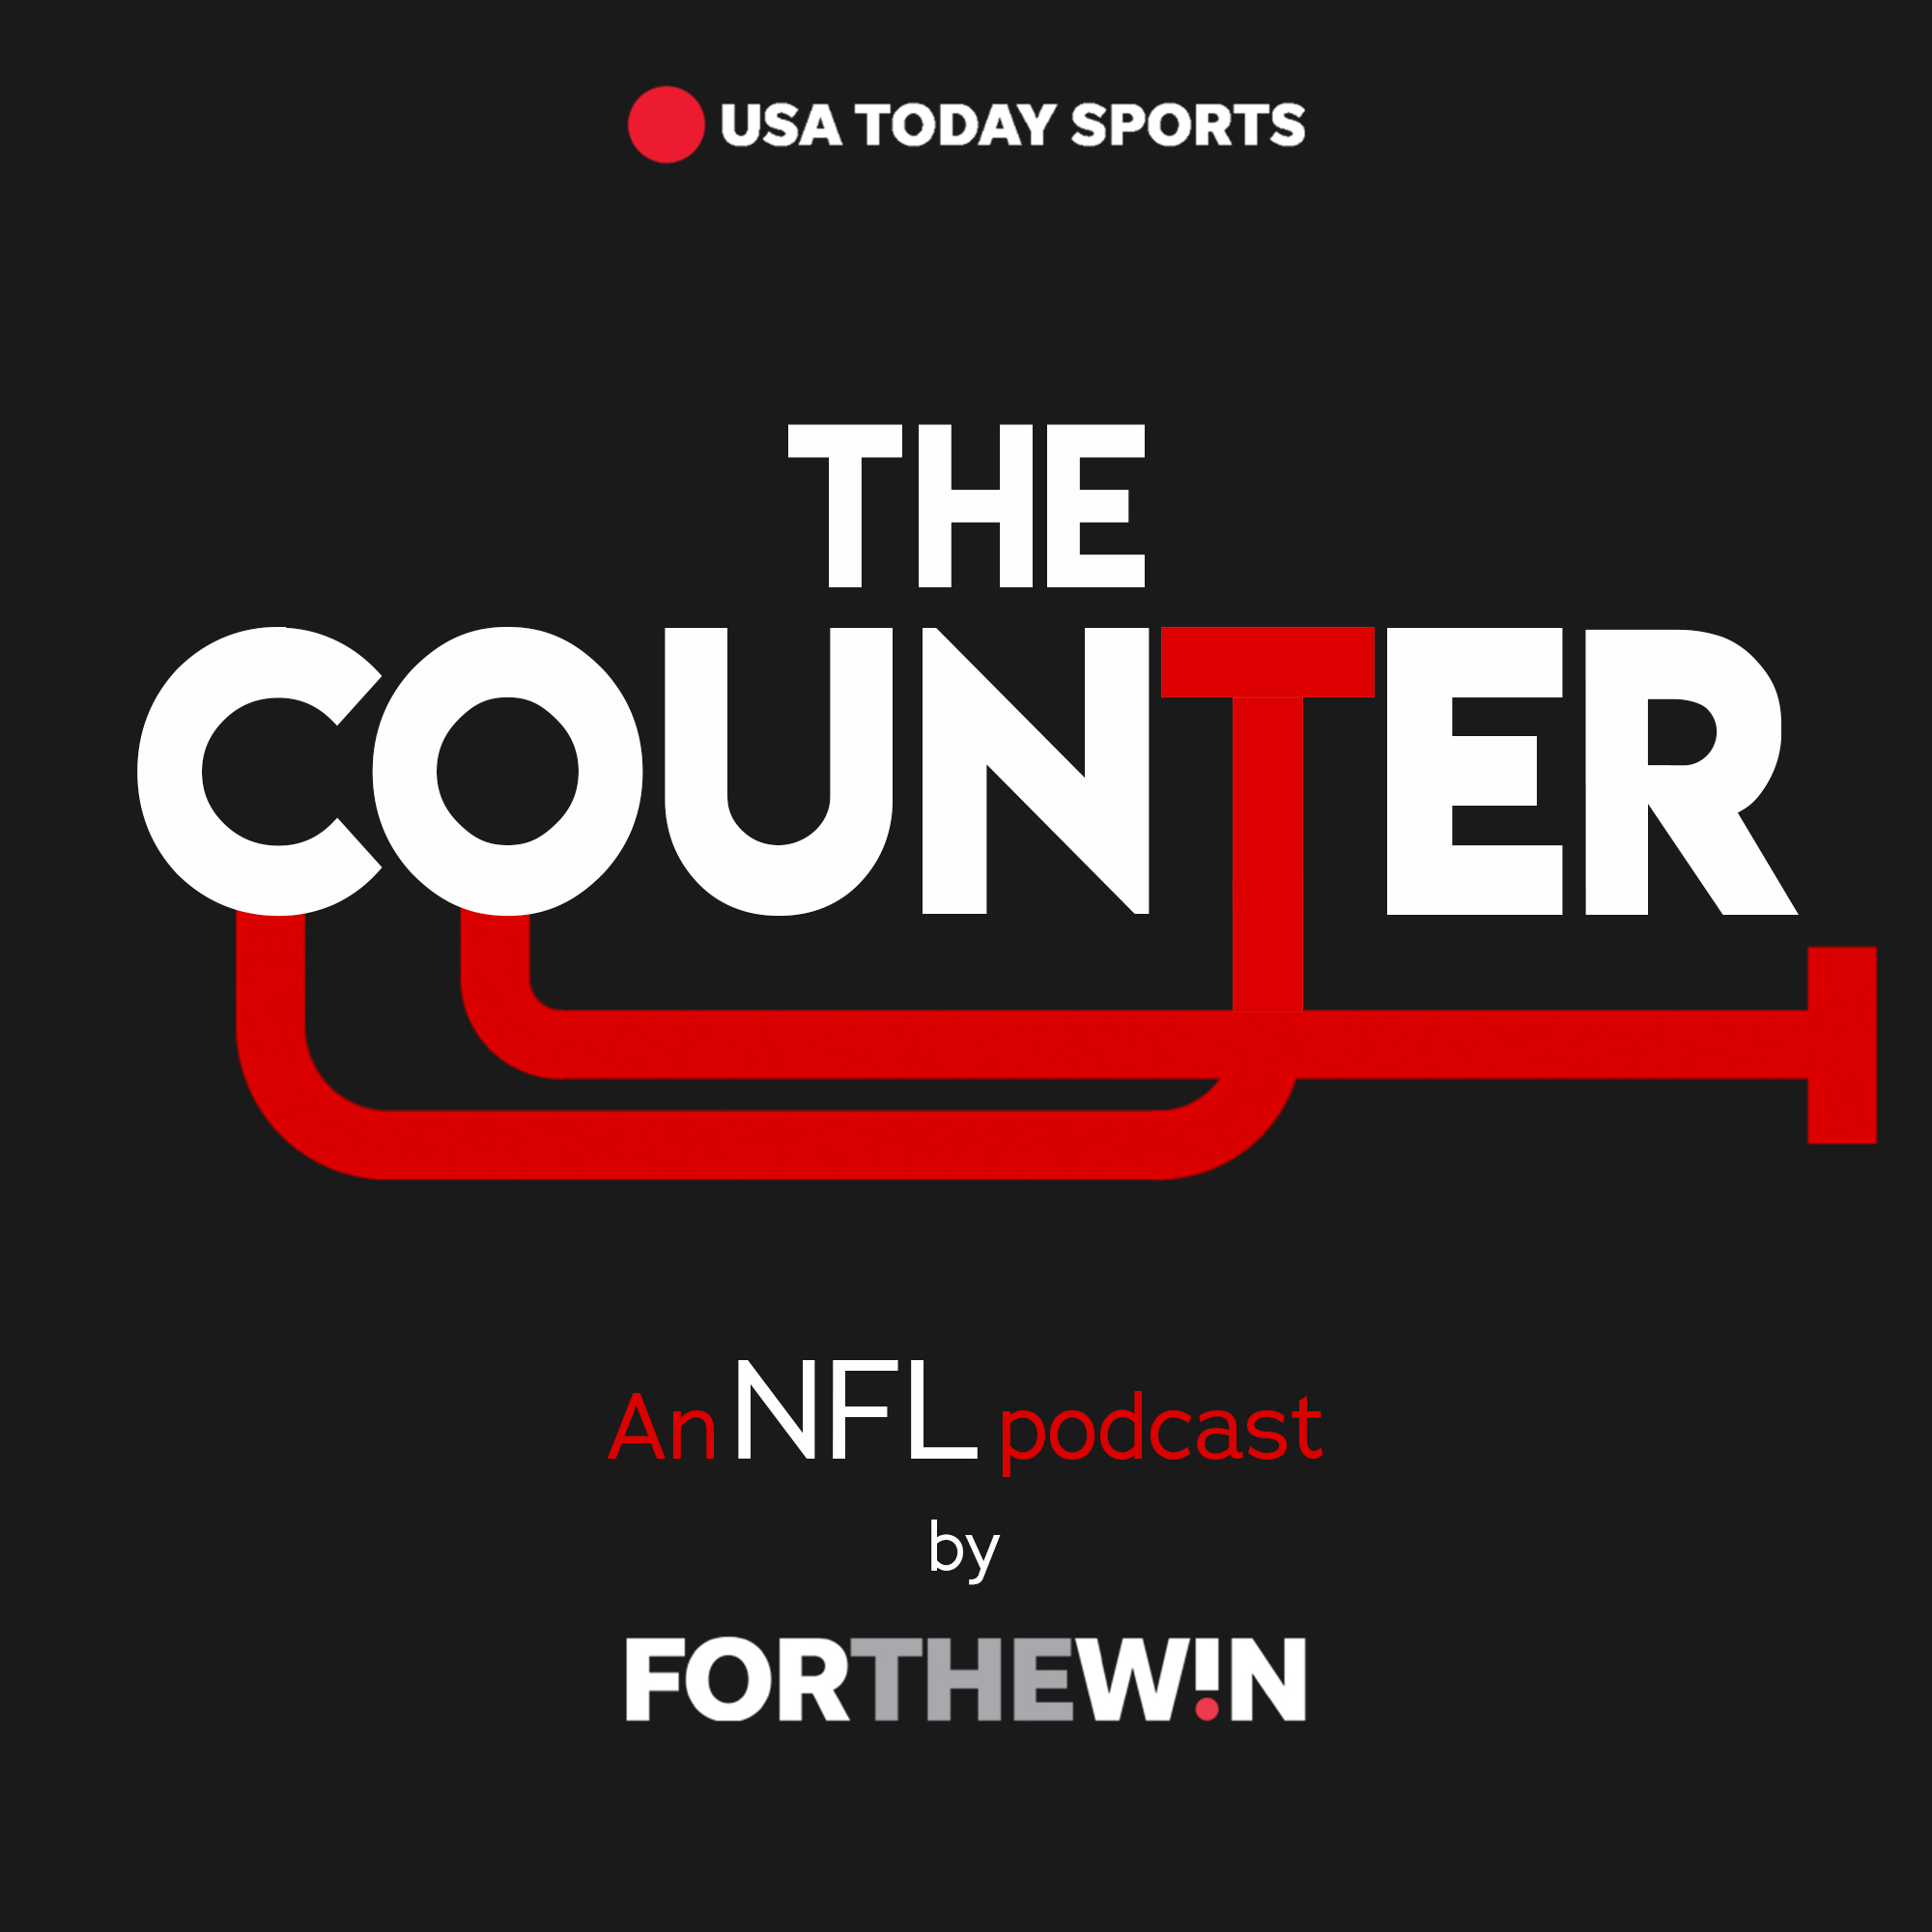 The Counter: An NFL Podcast by For The Win - Former Patriots, Lions and Jets lineman Damien Woody joins the show